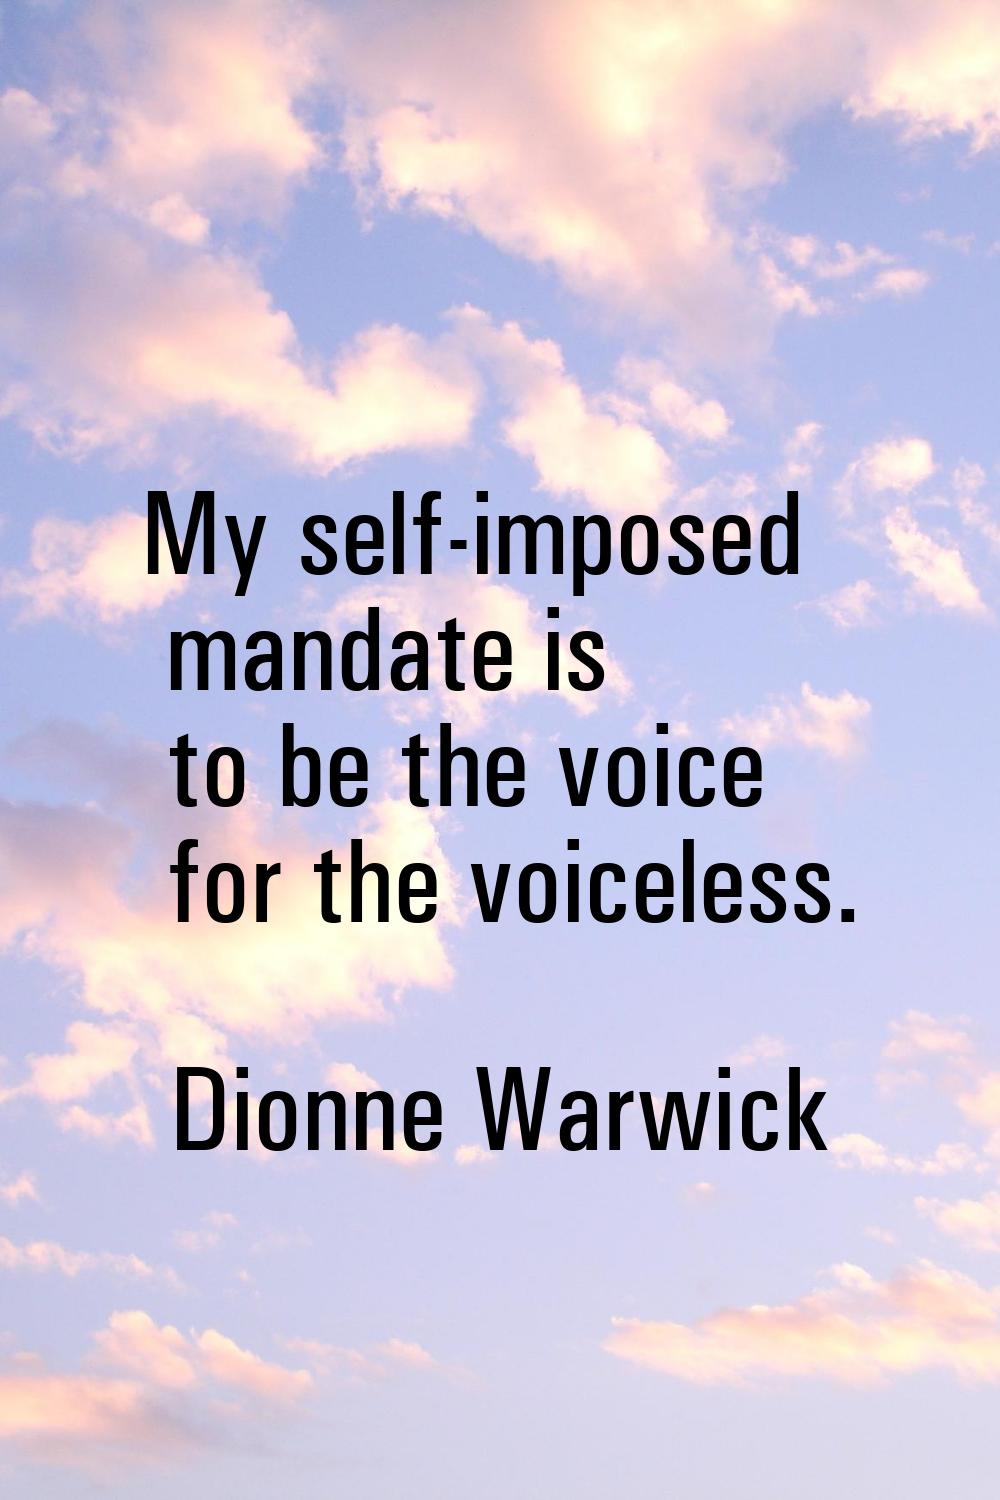 My self-imposed mandate is to be the voice for the voiceless.